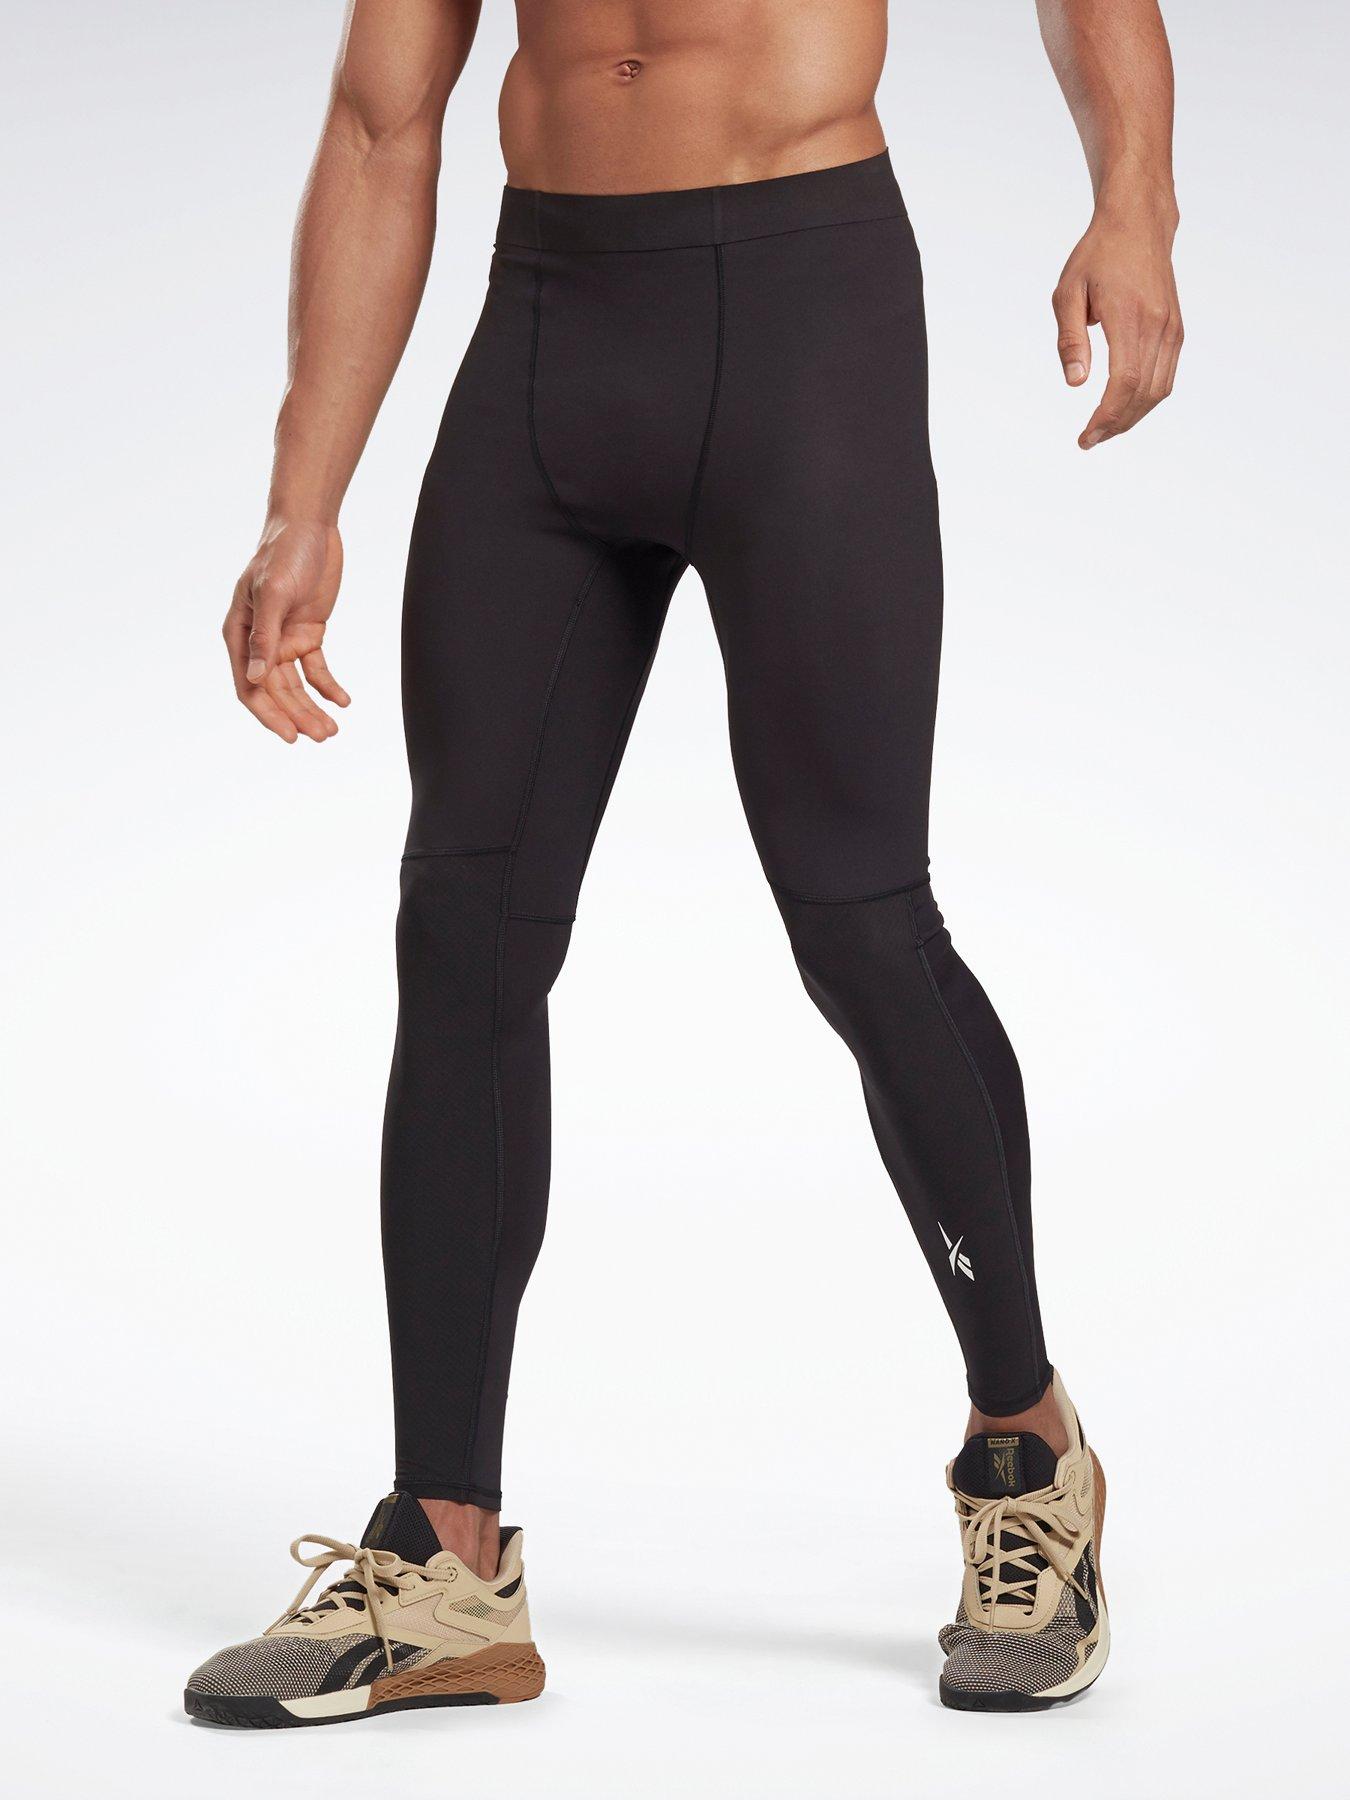 Sportswear United By Fitness Compression Tights